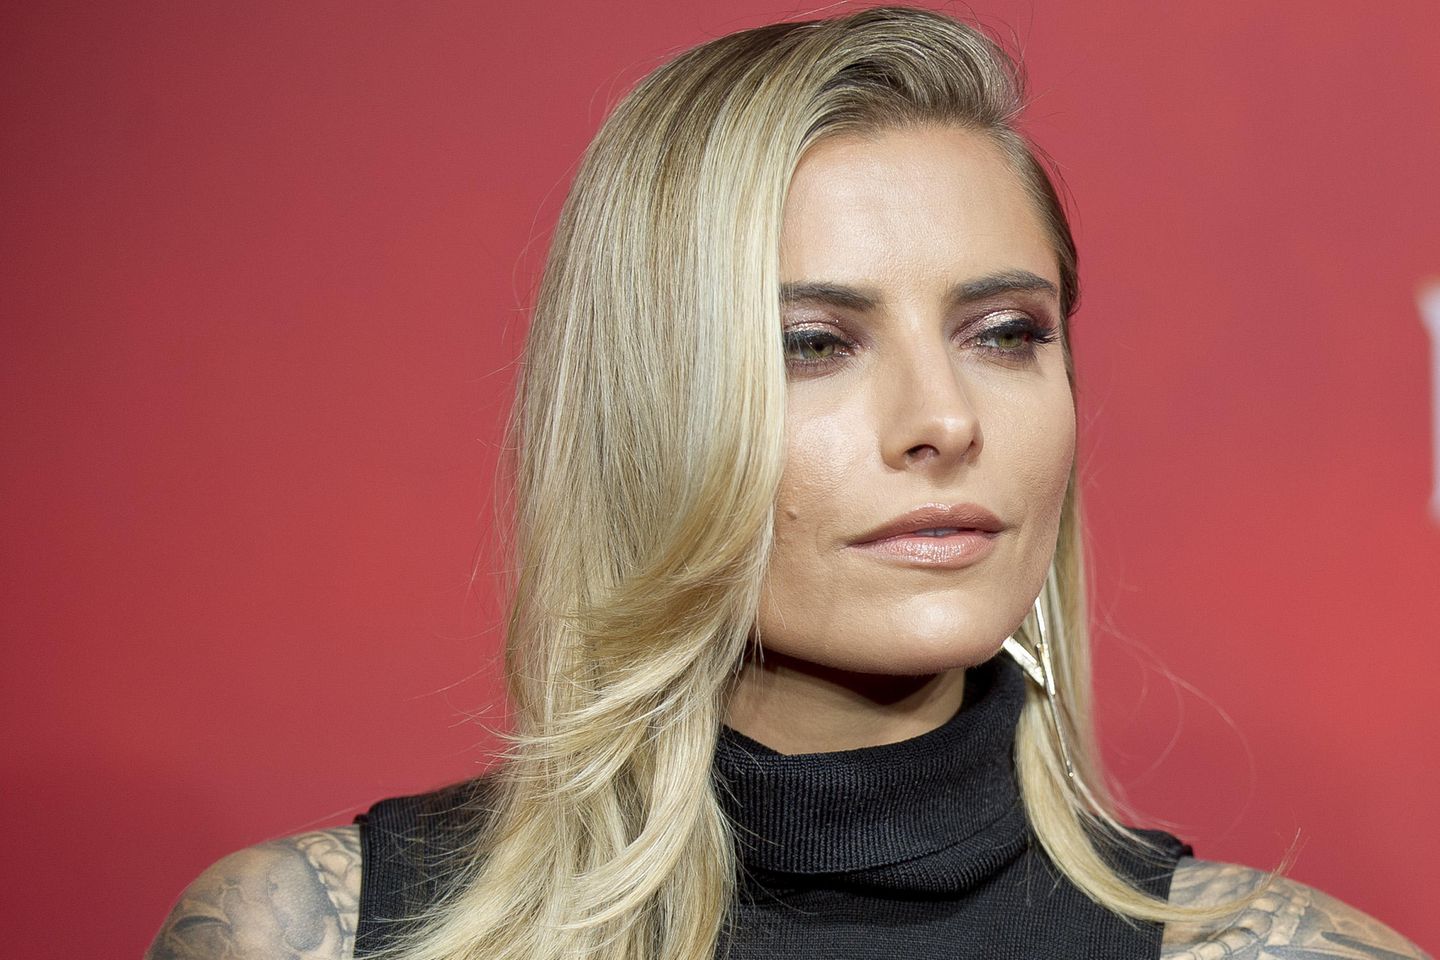 Gavin rossdale and his girlfriend sophia thomalla have seemingly called it ...